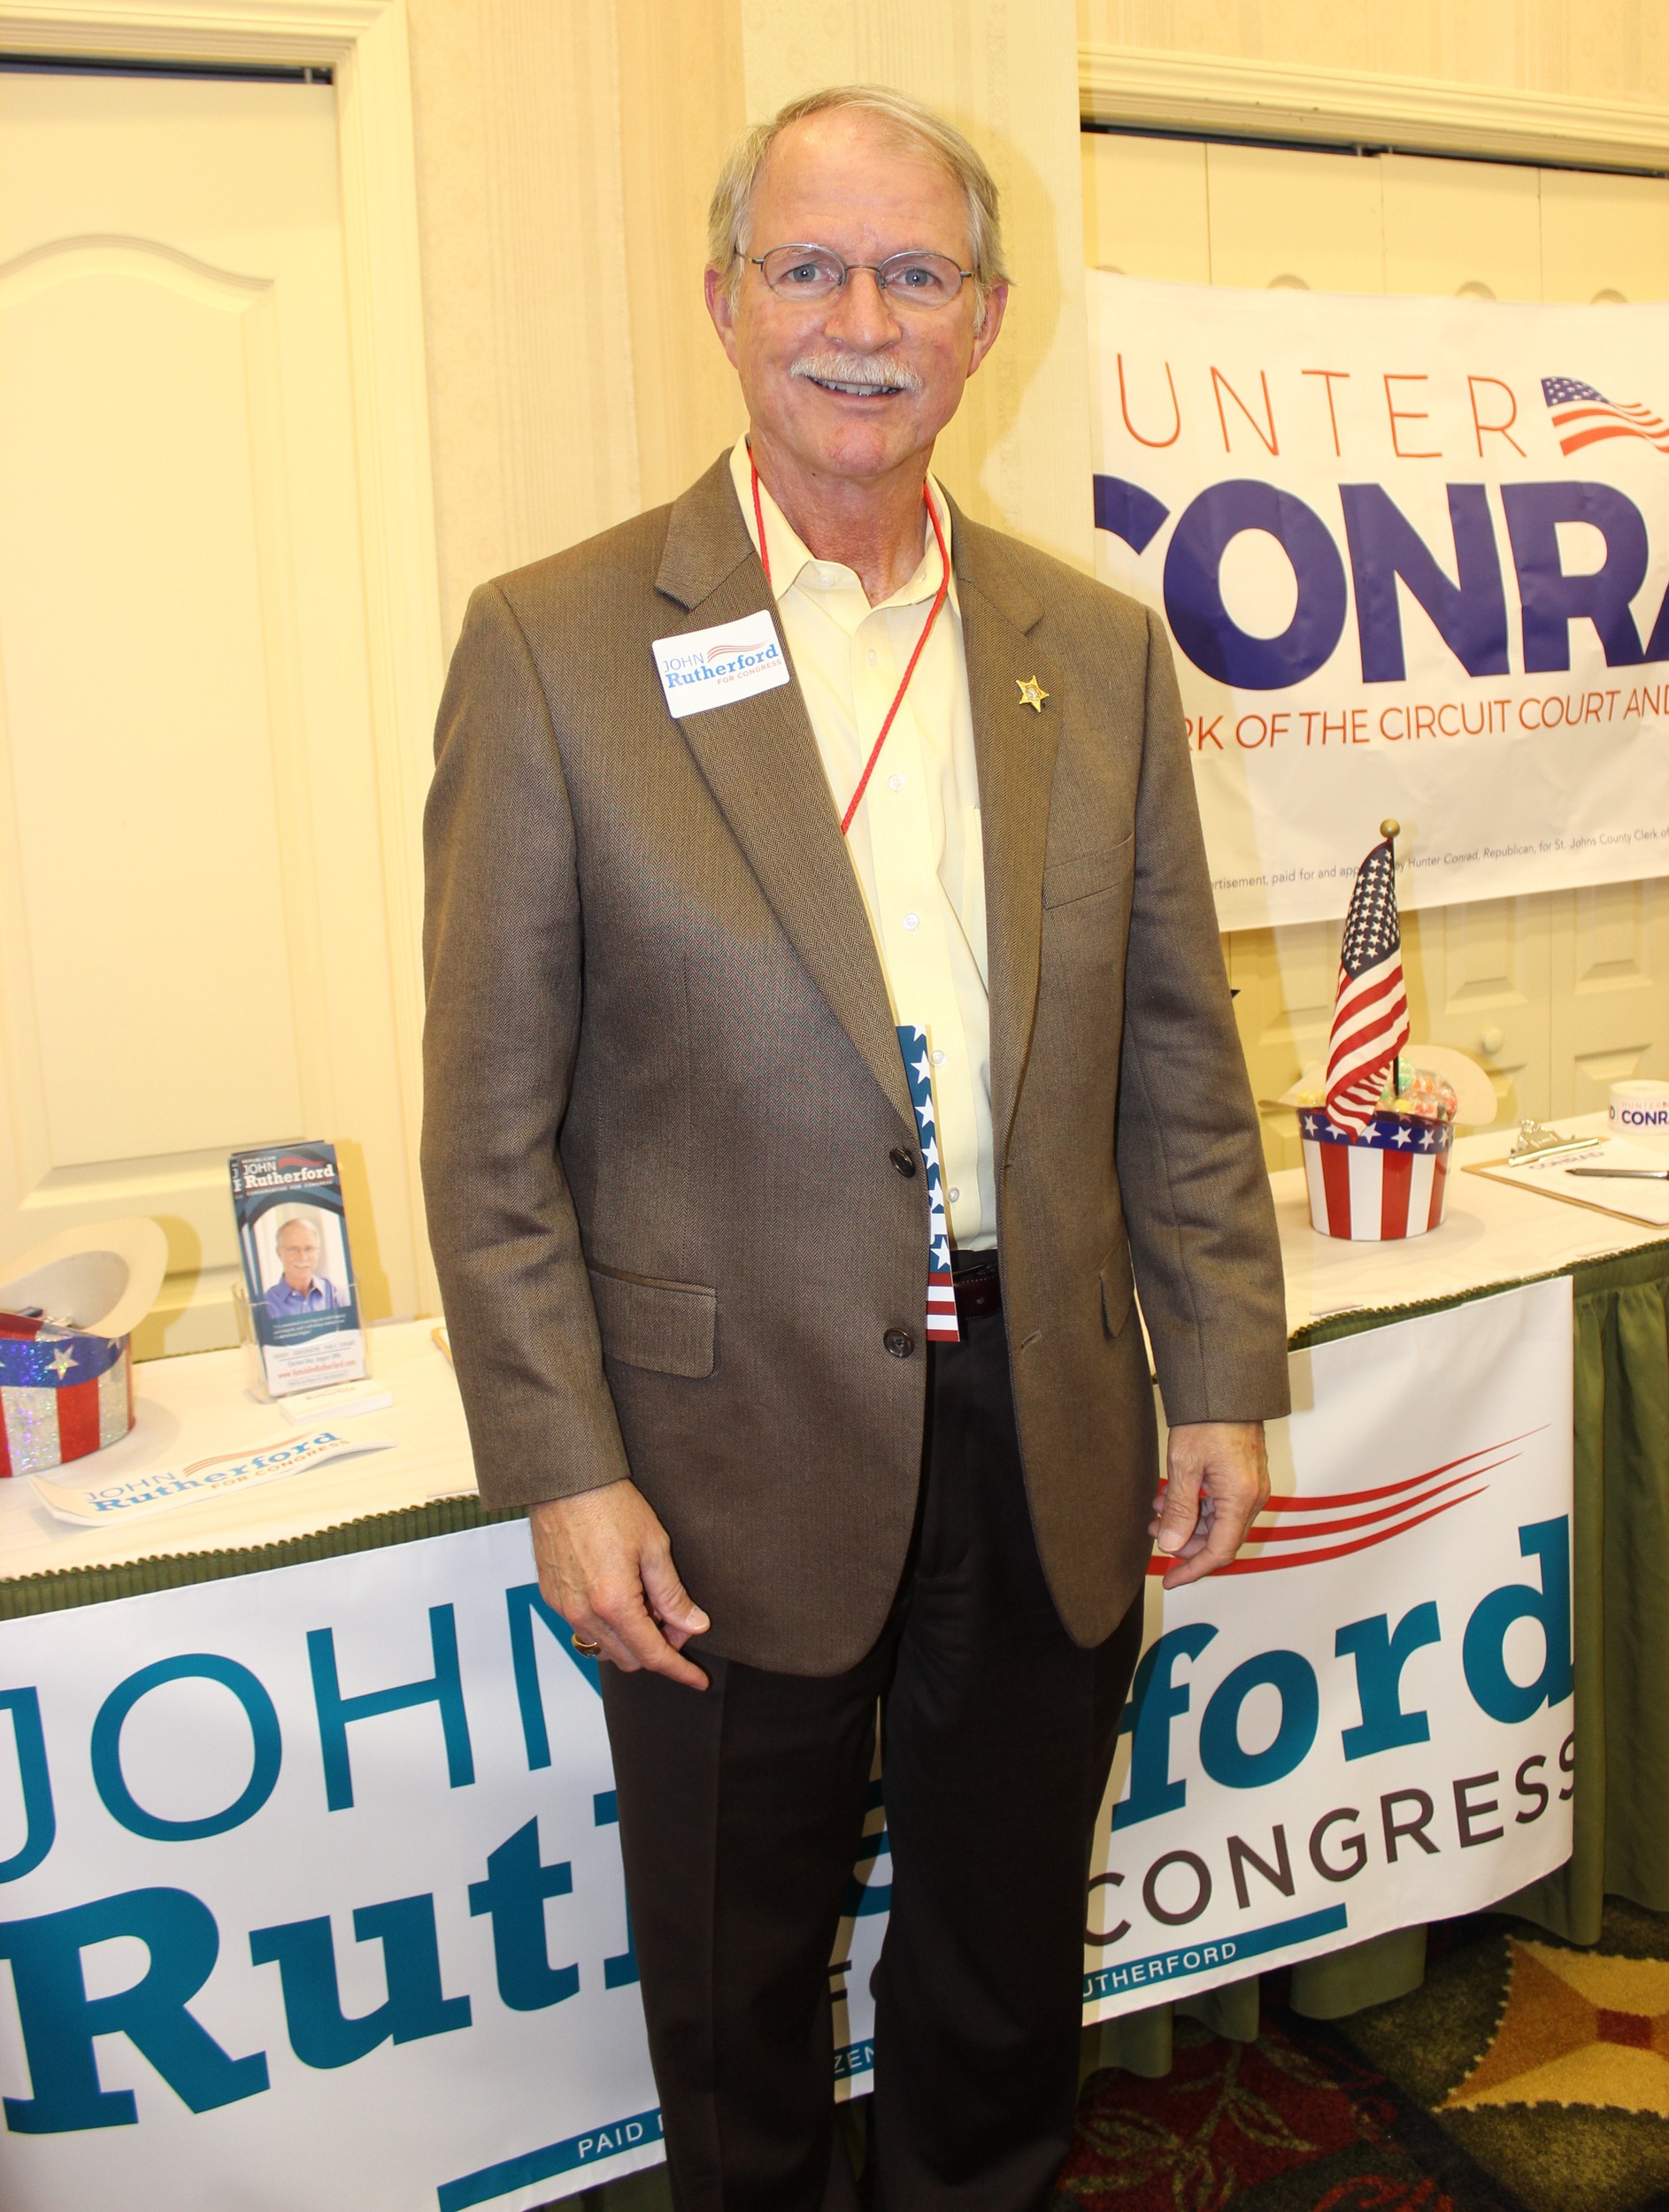 Former Jacksonville Sheriff and 4th Congressional District Candidate John Rutherford